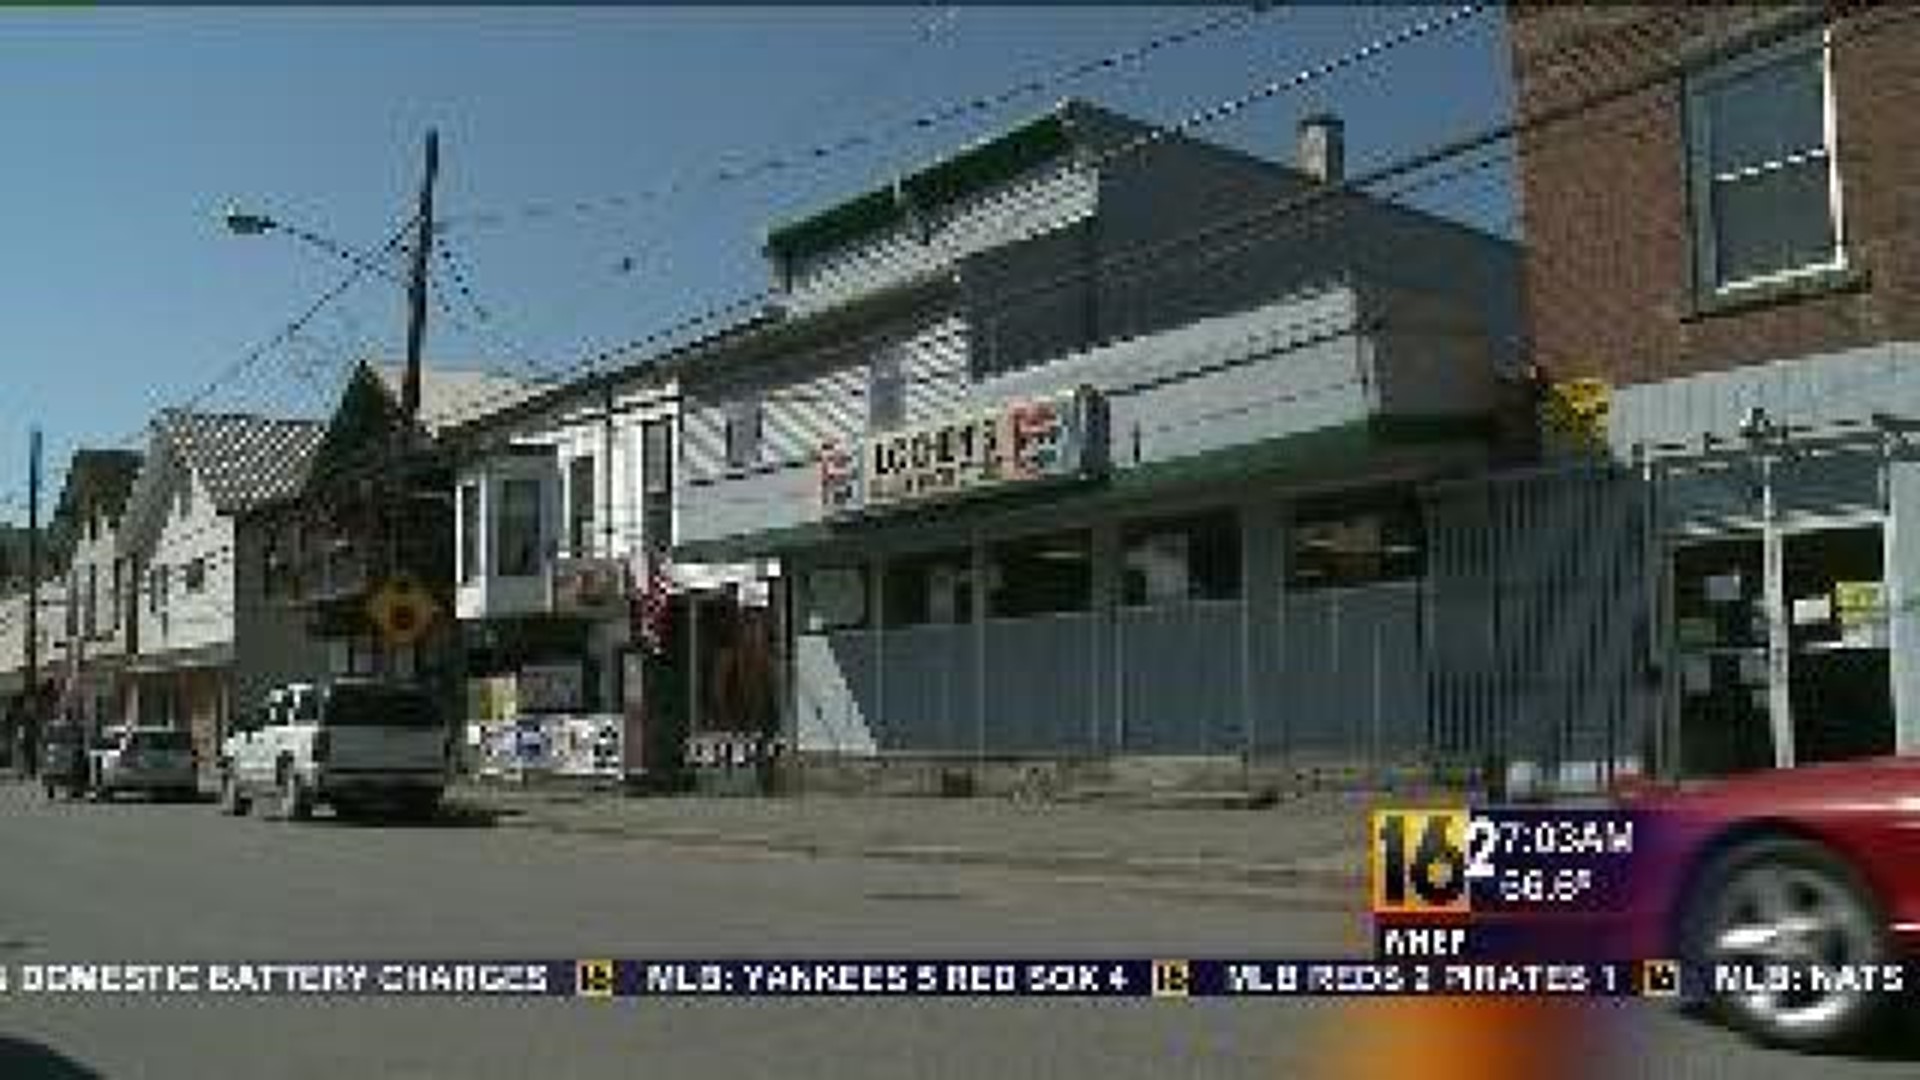 Local Business to Close in Wyoming County